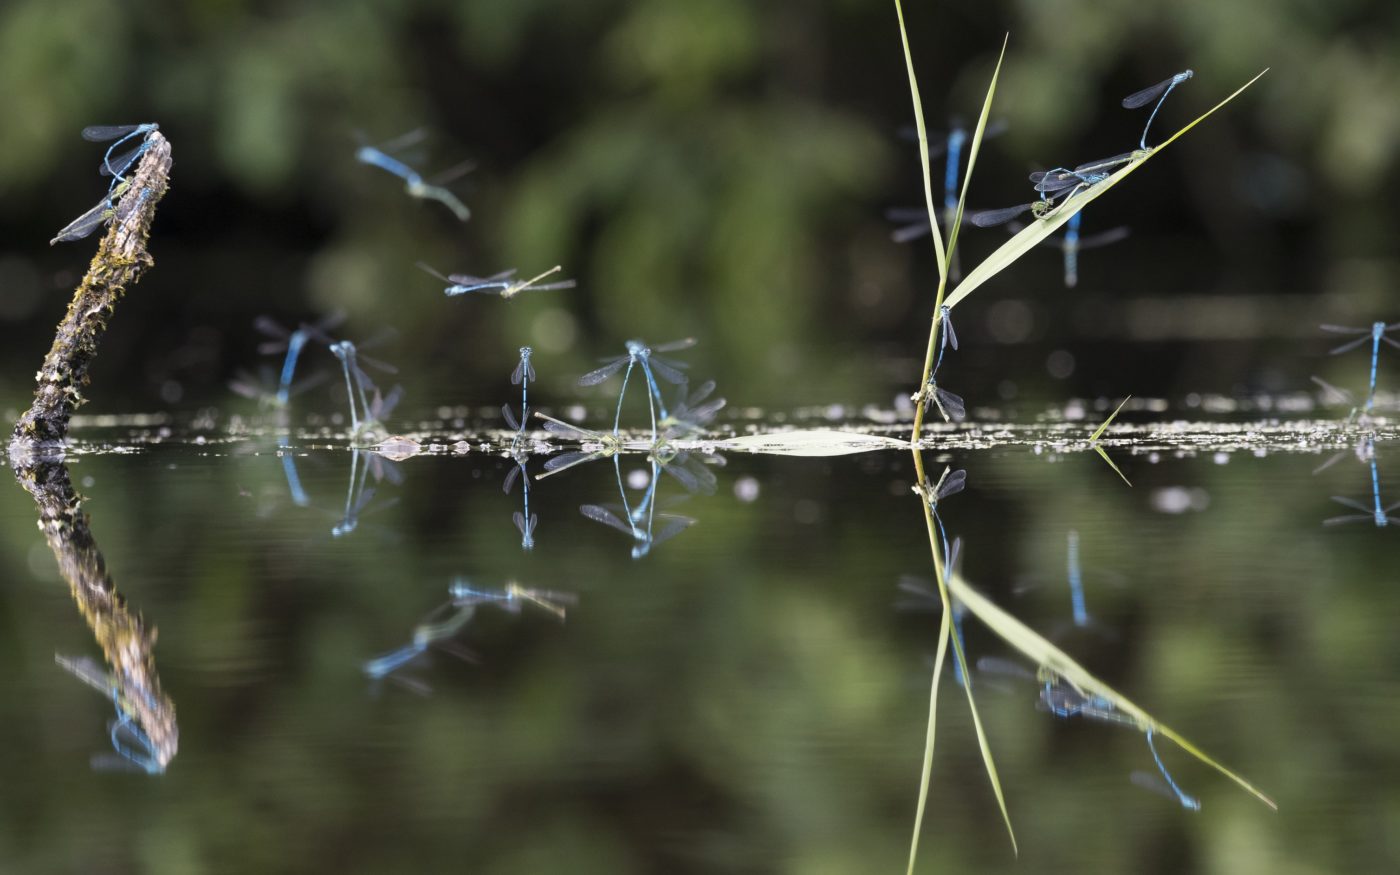 Common Blue/Azure Damselflies reflected on a pond surface